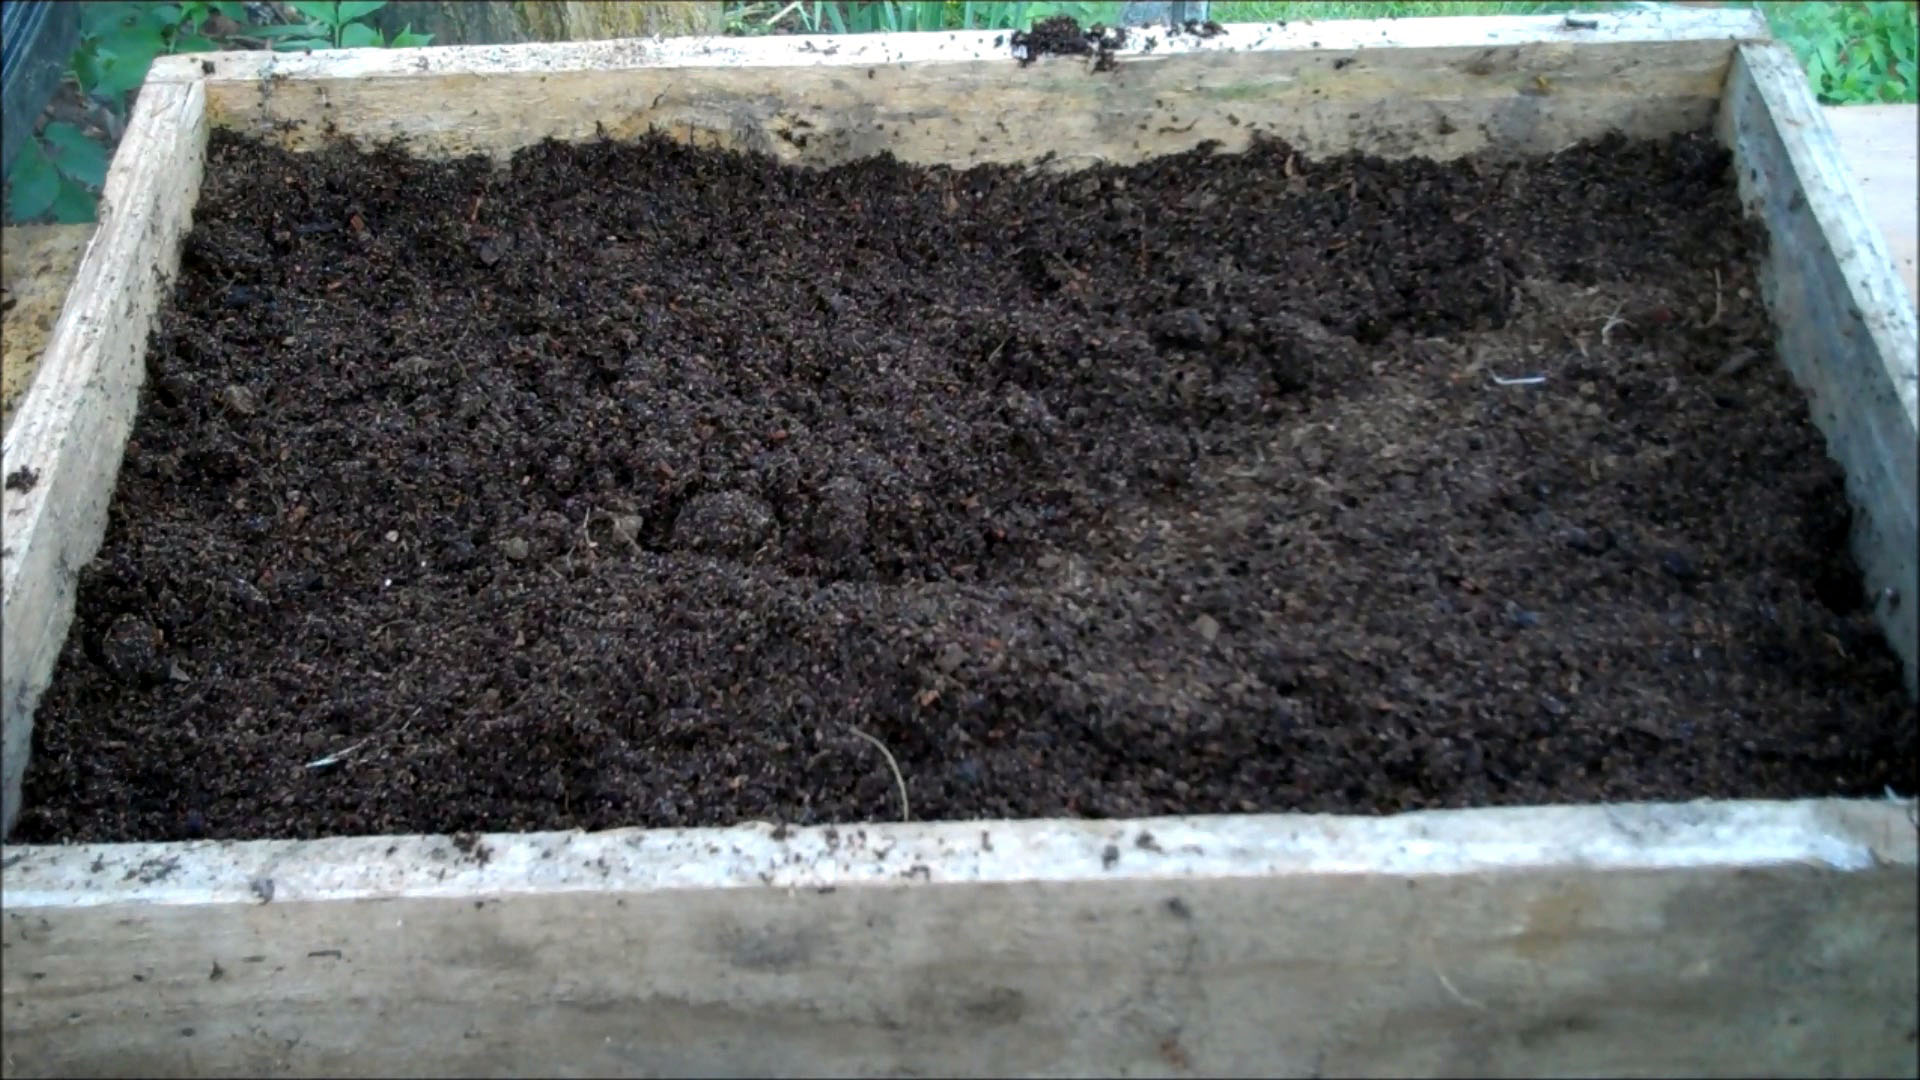 fill tray with compost